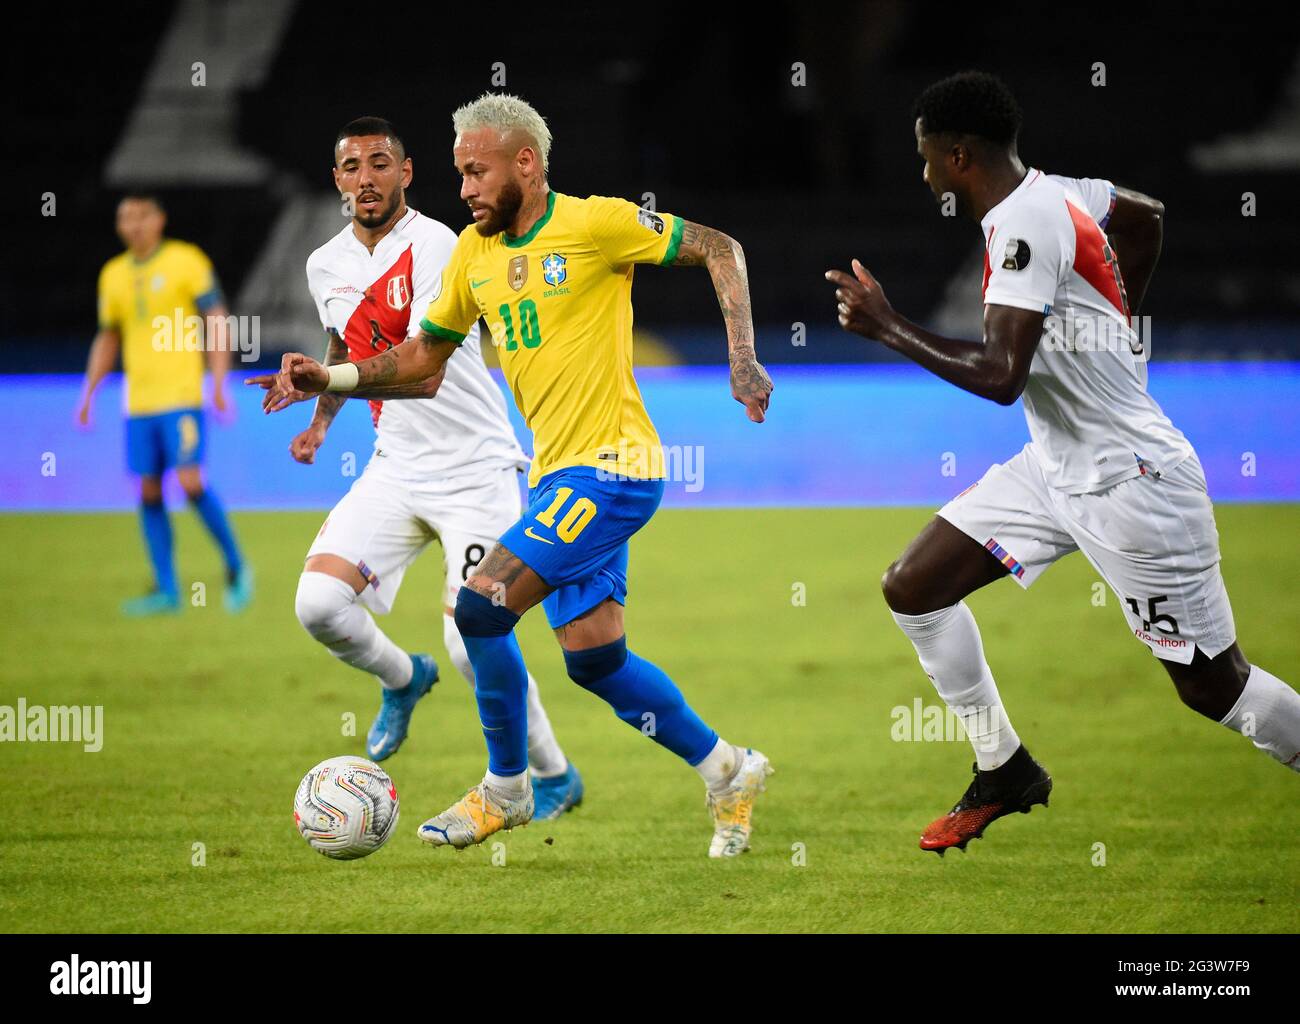 Rio de Janeiro, Brazil. 17th June, 2021: Brazil's Neymar, left, and Peru's Andre Carrillo battle for the ball during a Copa America soccer match at Nilton Santos stadium in Rio de Janeiro, Brazil 17 Jun 2021Brazil v Peru, Copa America, Football, Estadio Nilton Santos, Rio de Janeiro, Brazil - 17 Jun 2021 player Neymar Credit: Andre Paes/Alamy Live News Stock Photo